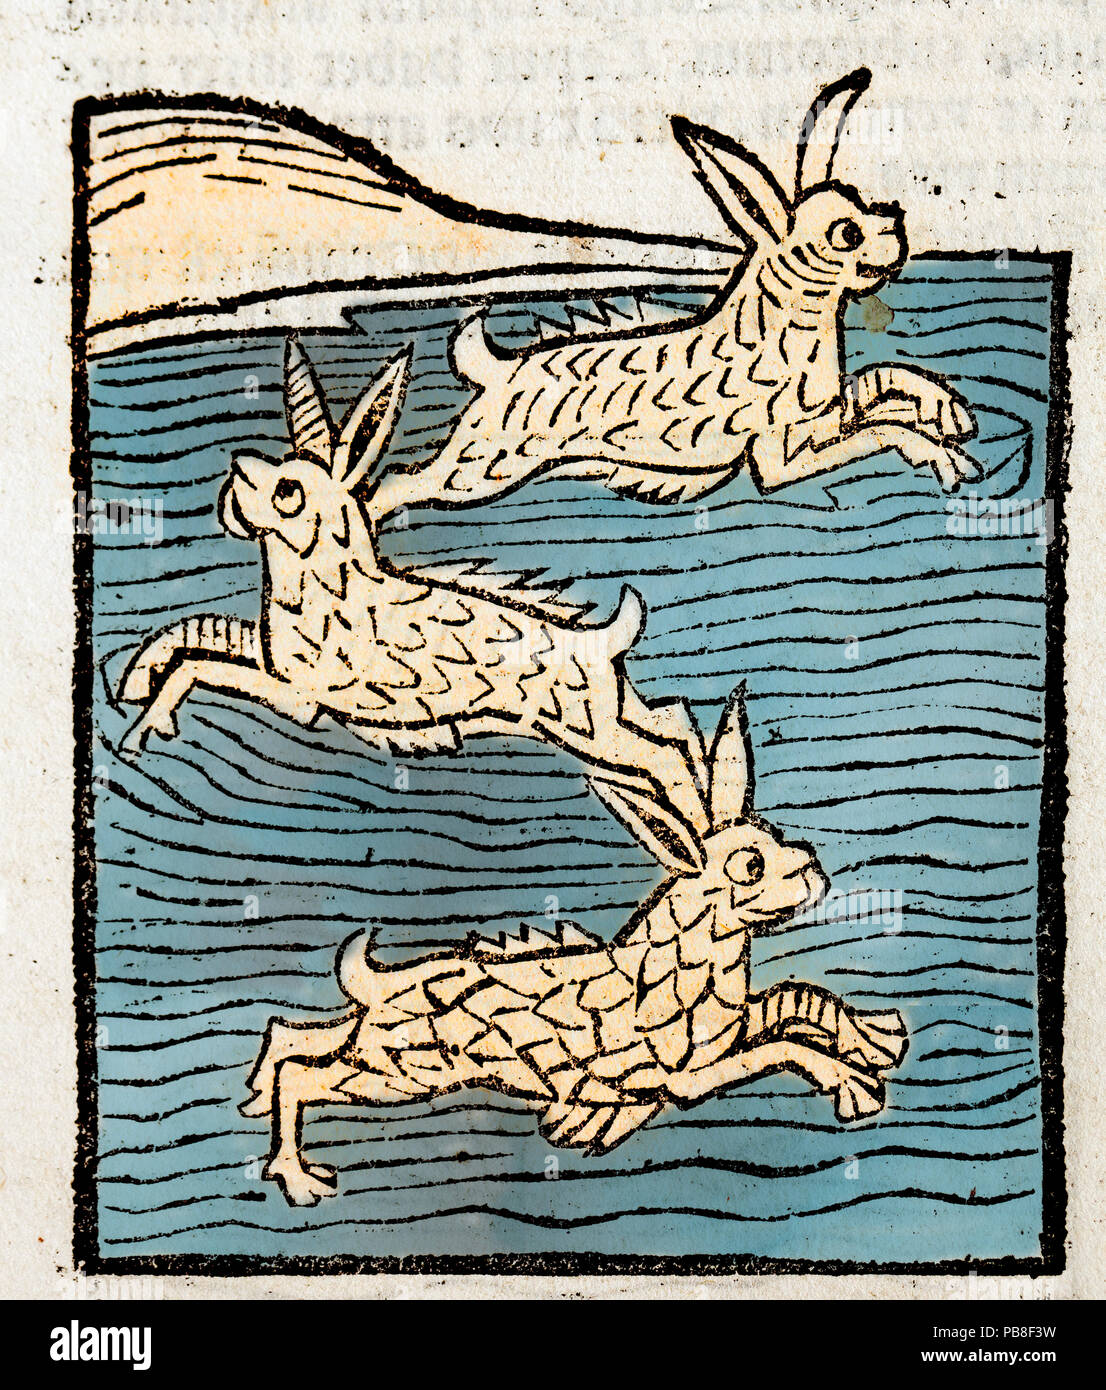 Woodblock illustration of Sea Hares from Ortus (Hortus) Sanitatis 1491 - translated from the Latin as 'Garden of Health'. During the middle ages all manner of land animals were thought to have their own scaled and finned equivalents in the sea. The Hortus was the first printed natural history encyclopaedia and was published by Jacob Meydenbach in Mainz, Germany in 1491 describing plants and animals (both real and mythical) together with minerals. Stock Photo